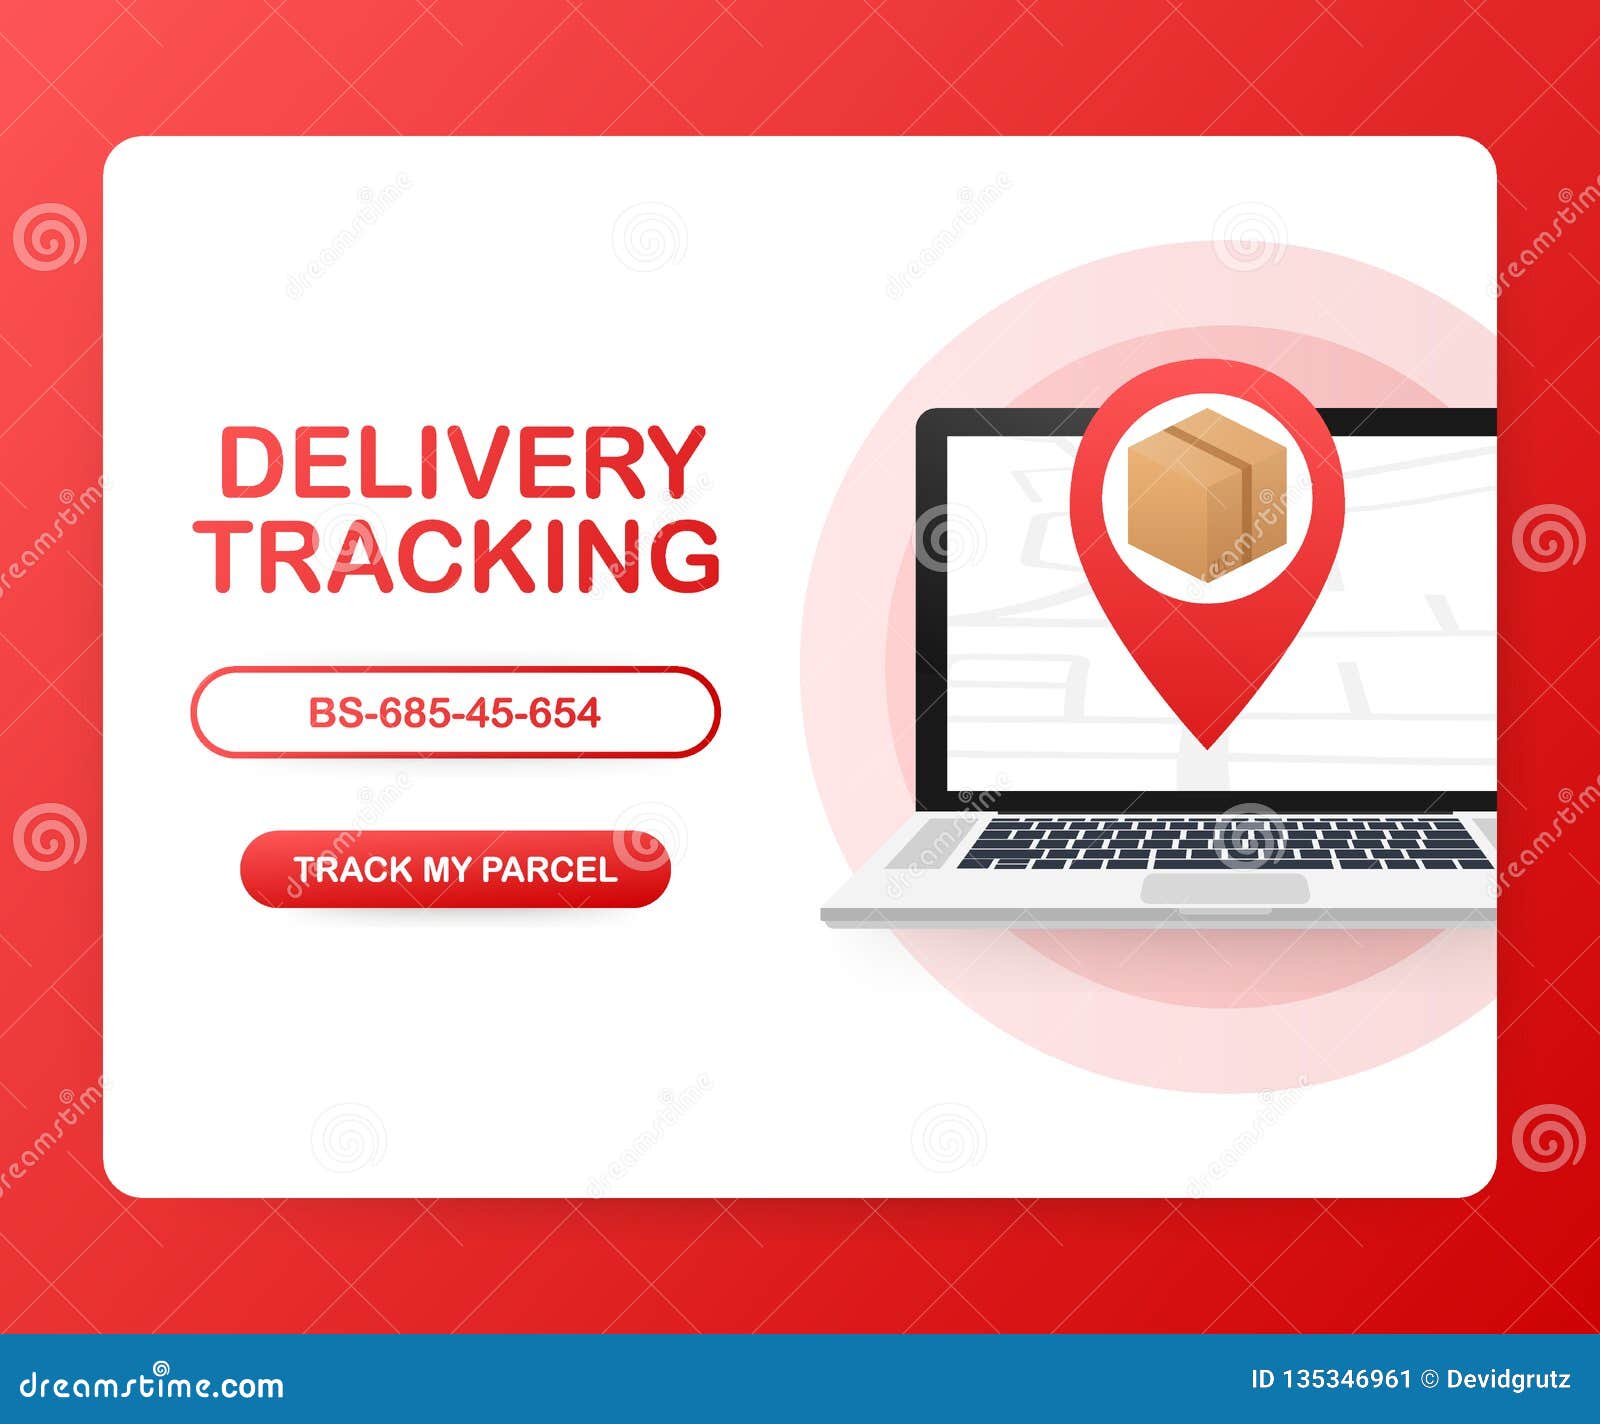 Track my parcel